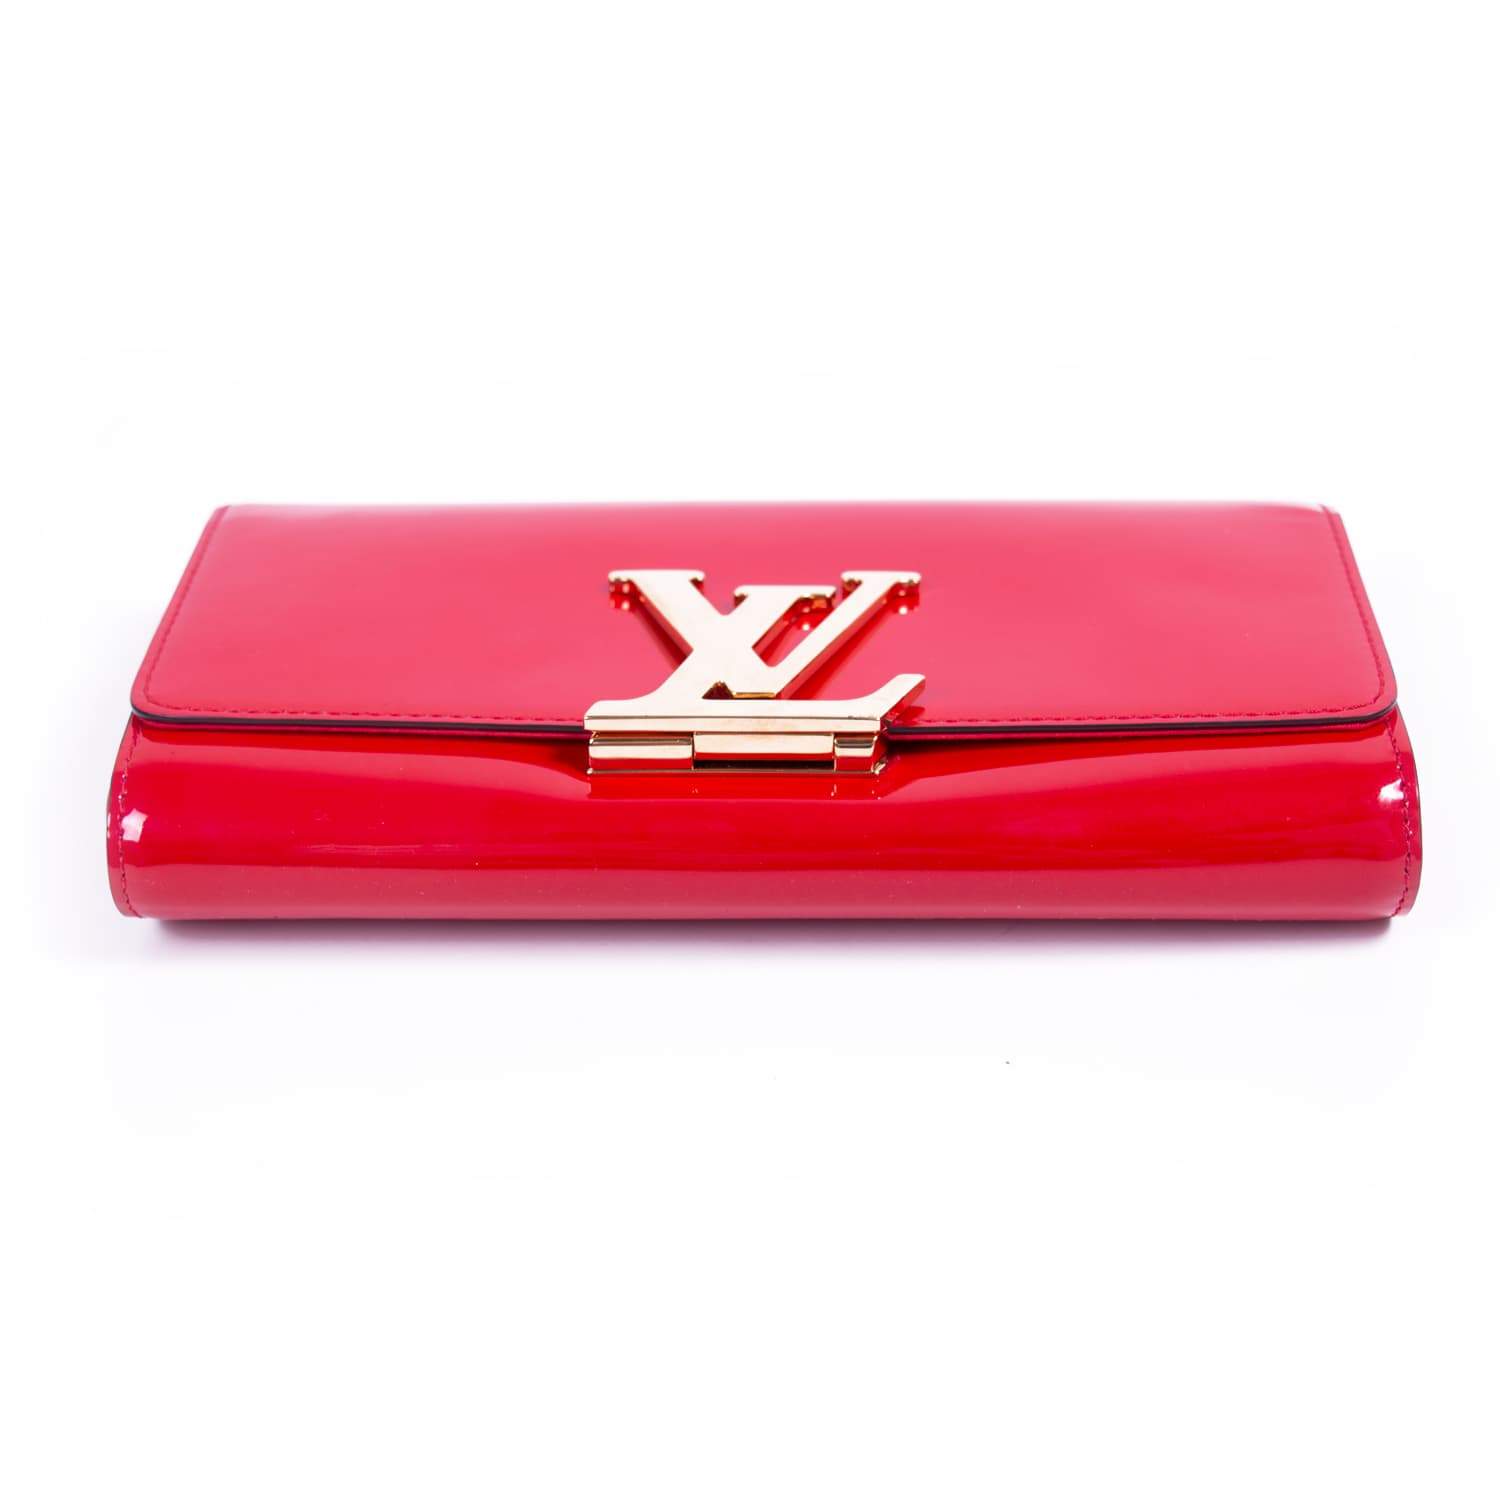 LOUIS VUITTON Red Patent Leather Louise Clutch Shoulder Crossbody Bag